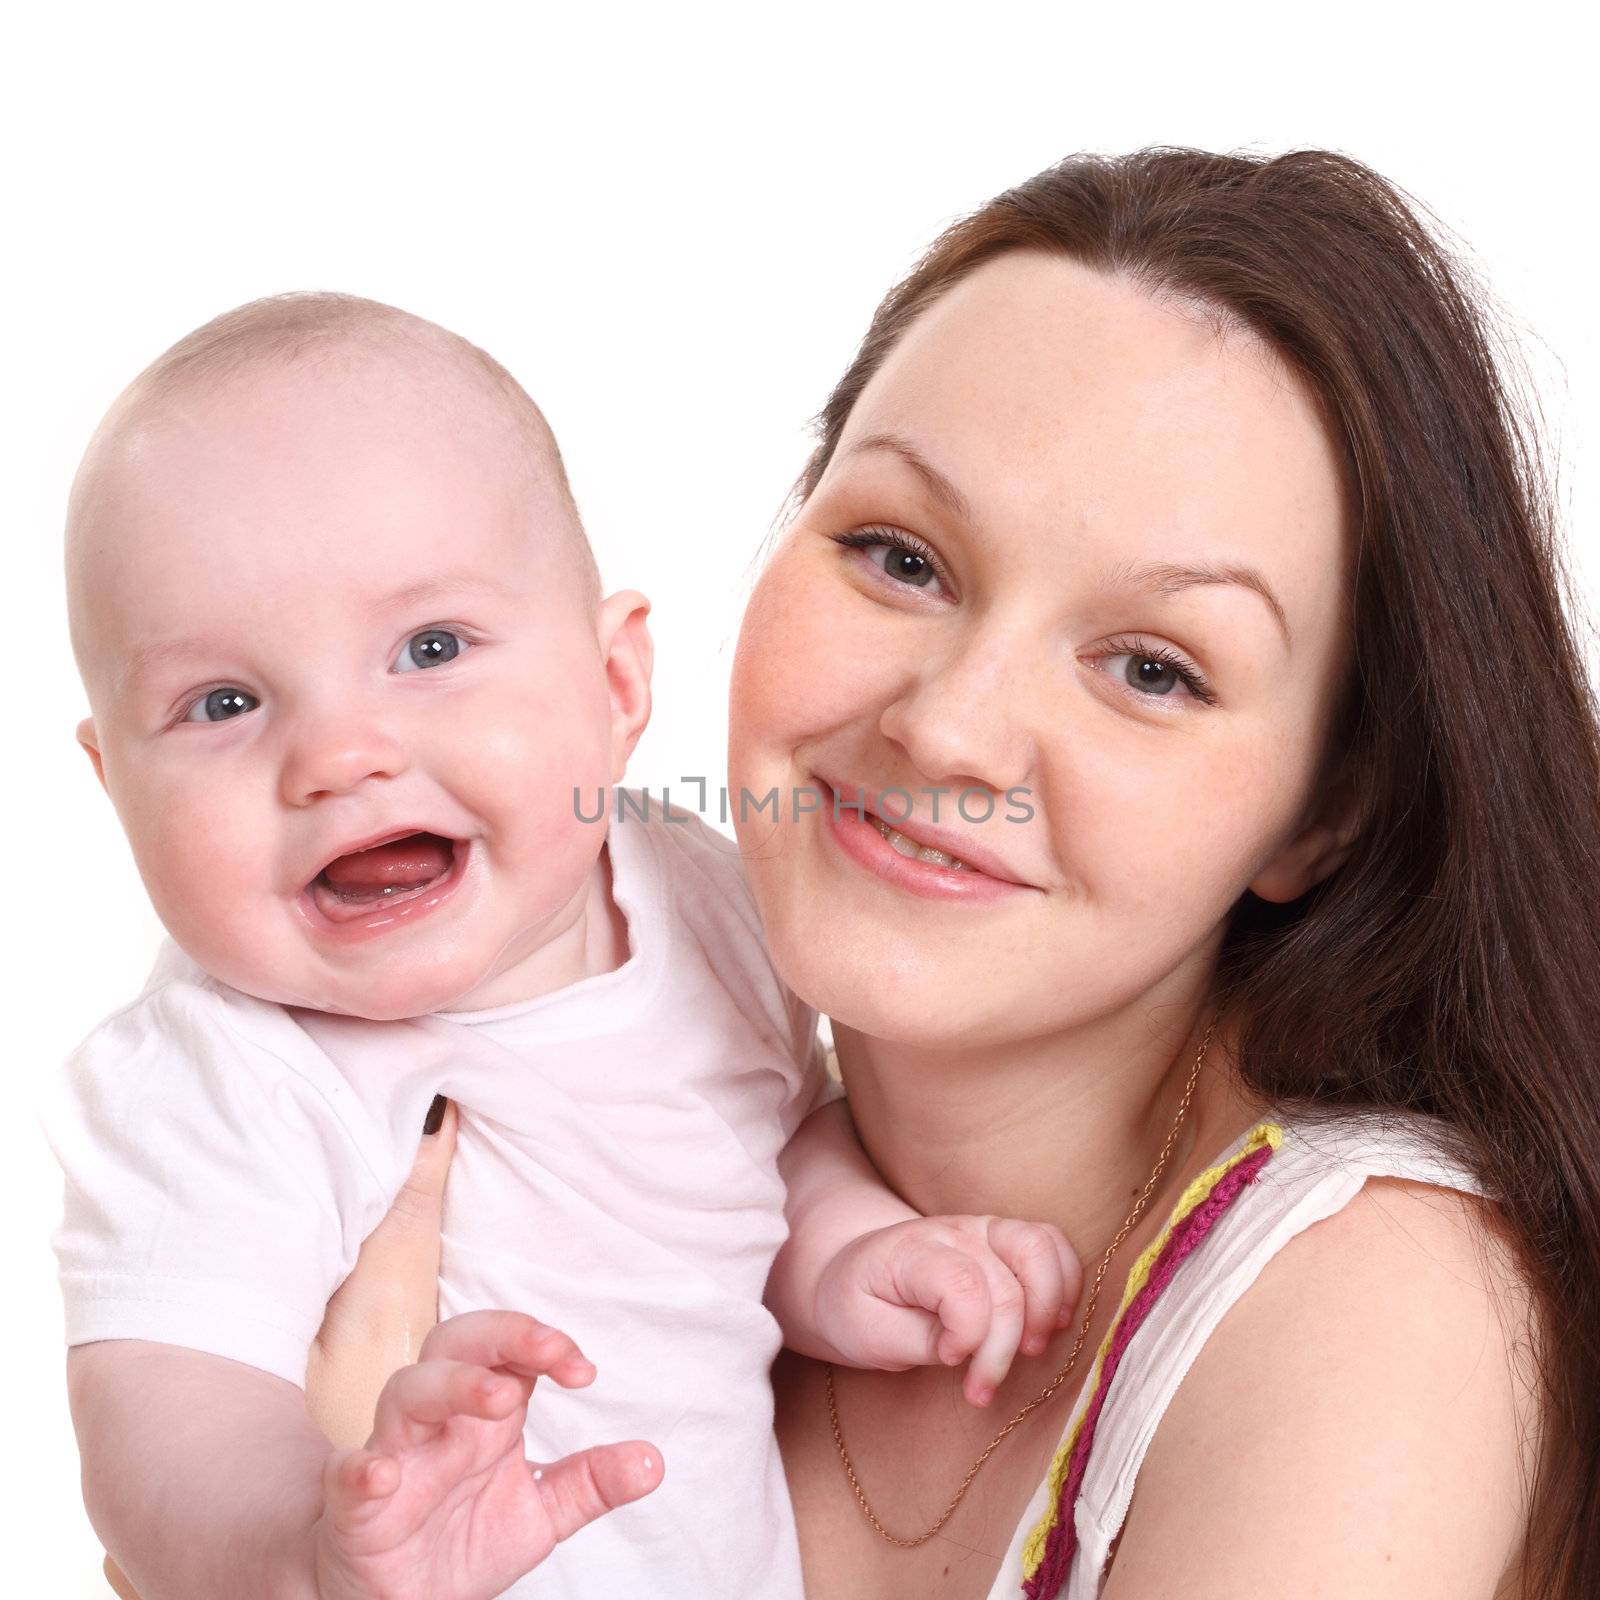 Young mum and the small son, portrait on a white background close up, the kid smiles, a format square.